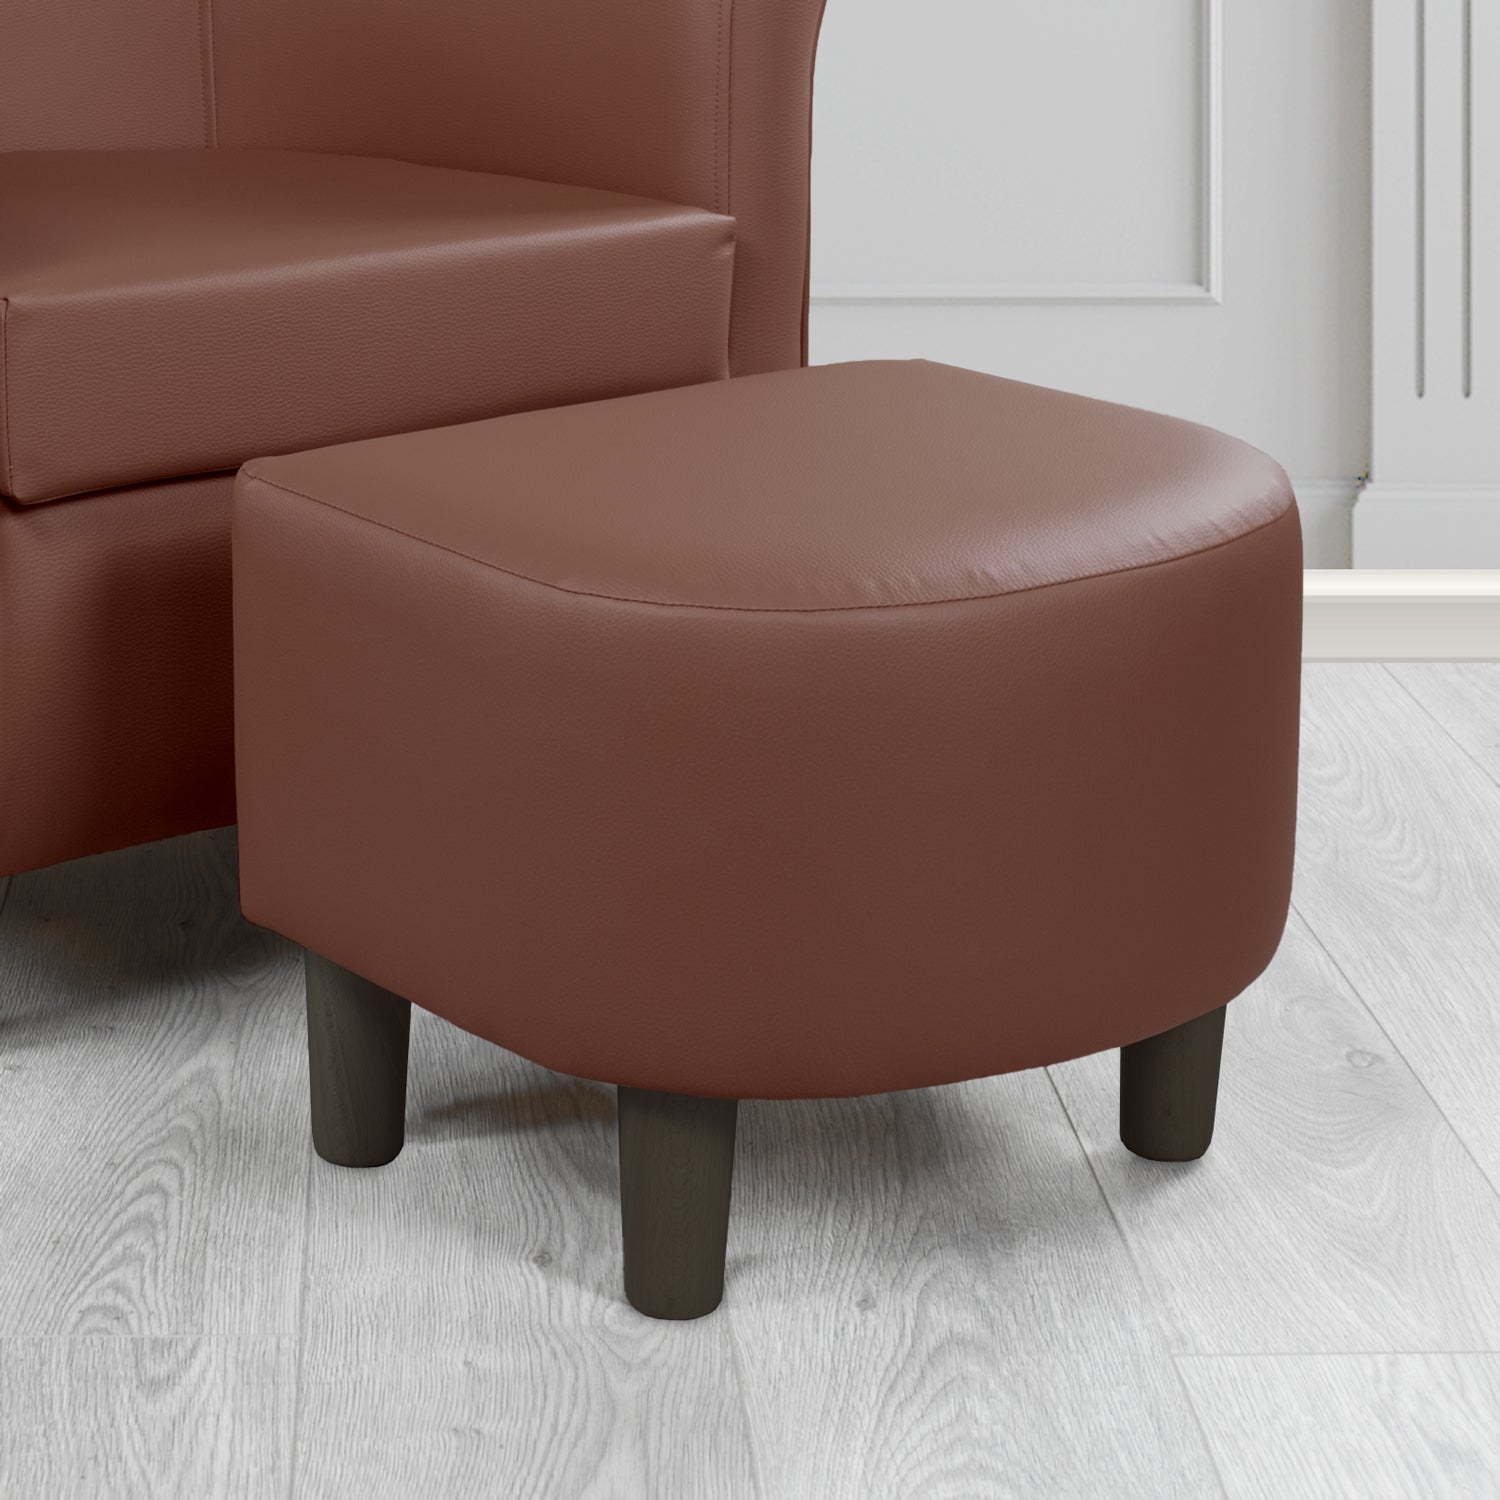 Tuscany Brown Faux Leather Footstool (6541217366058)